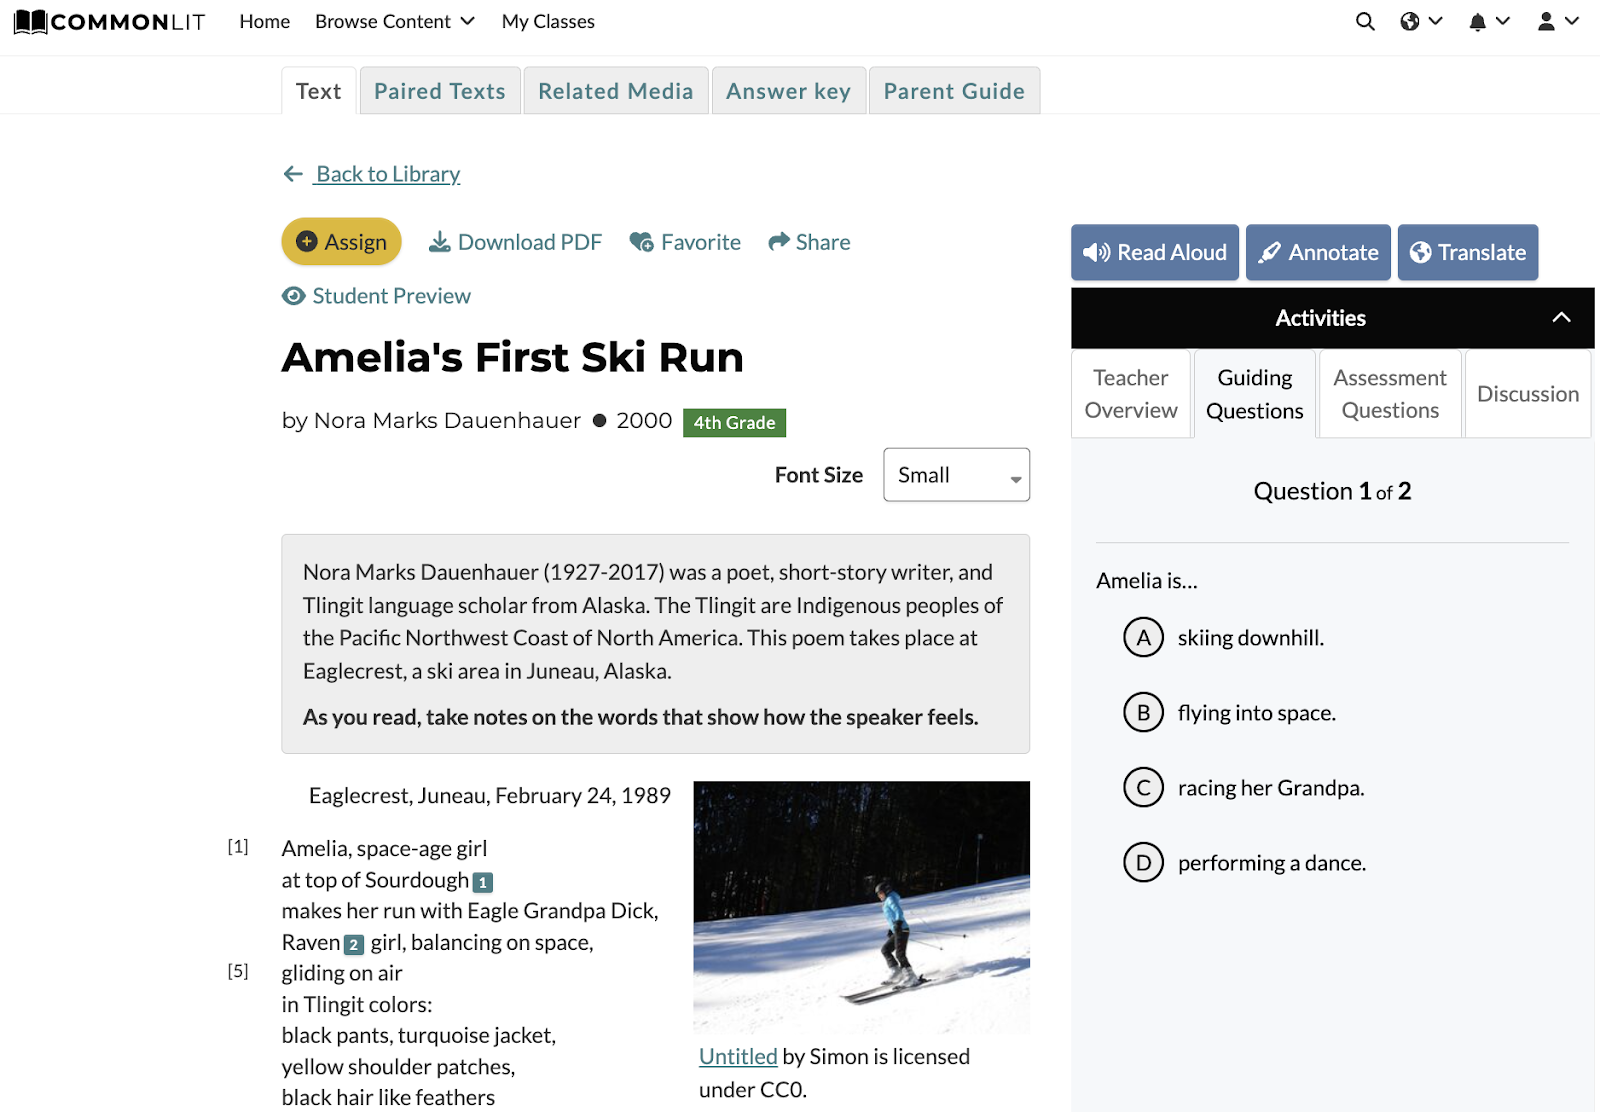 Screenshot of a short poem about winter, called “Amelia’s First Ski Run,” from the CommonLit Library.